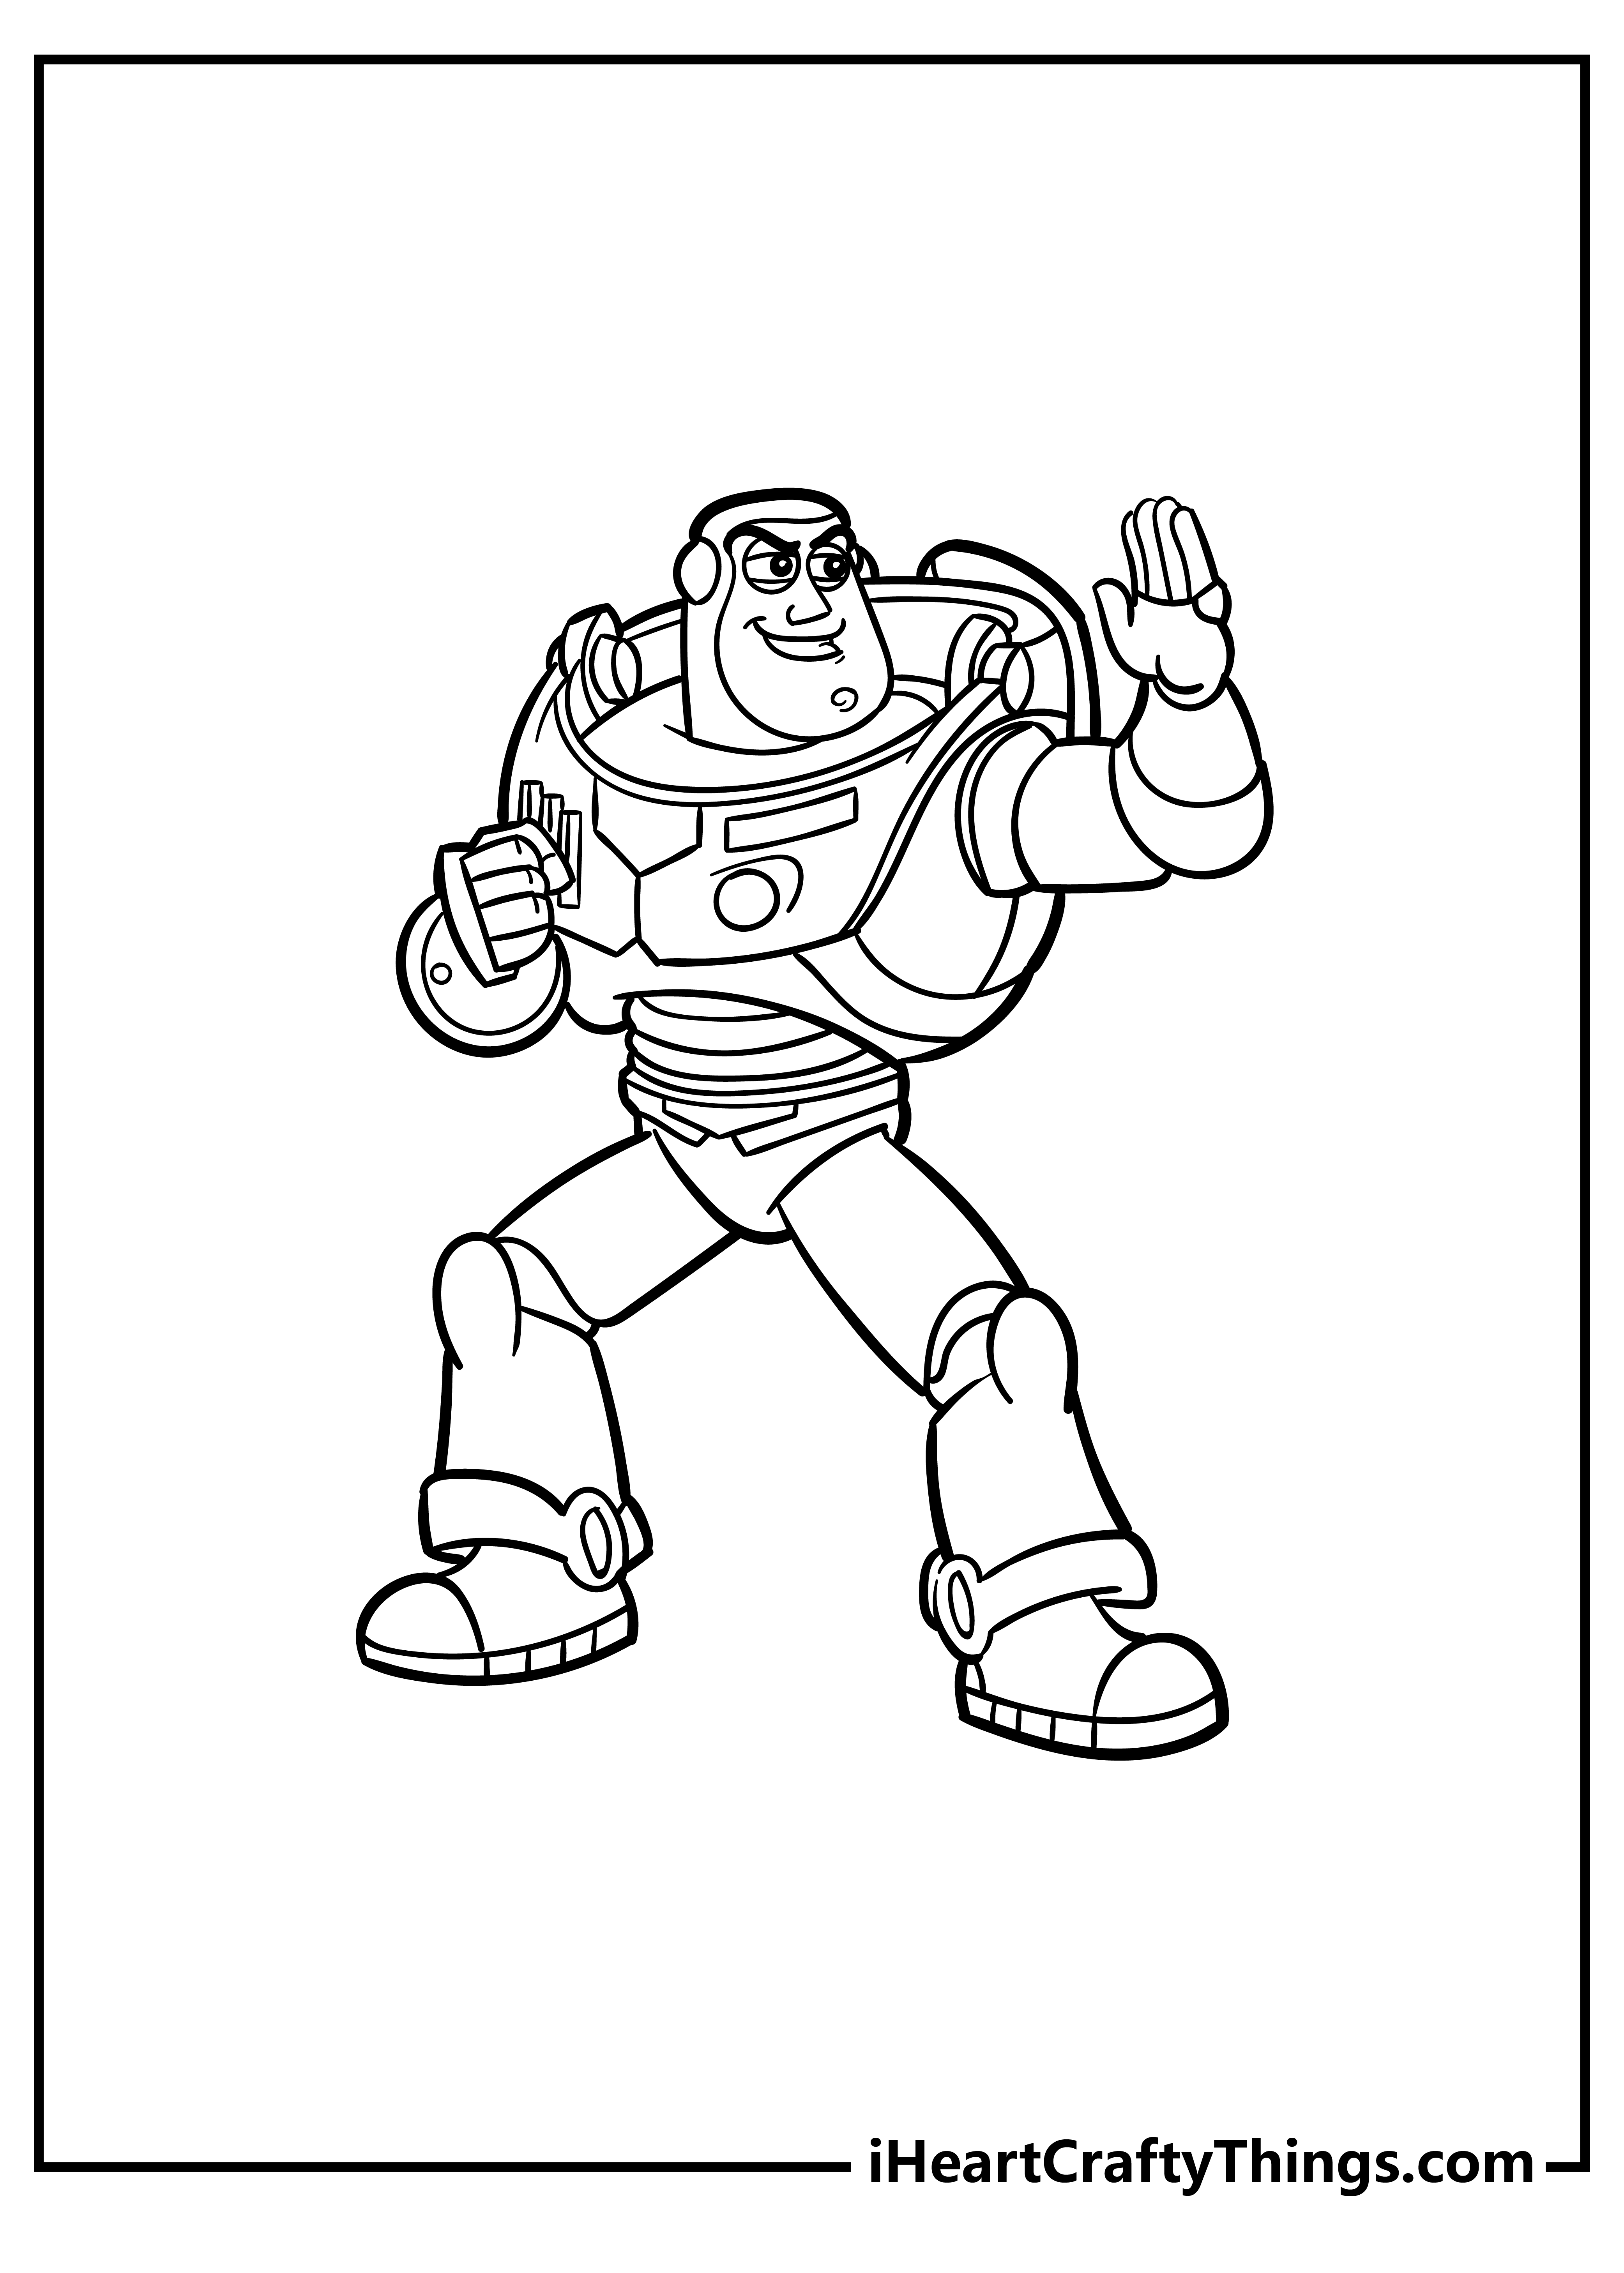 Buzz Lightyear Cartoon Easy Coloring Pages